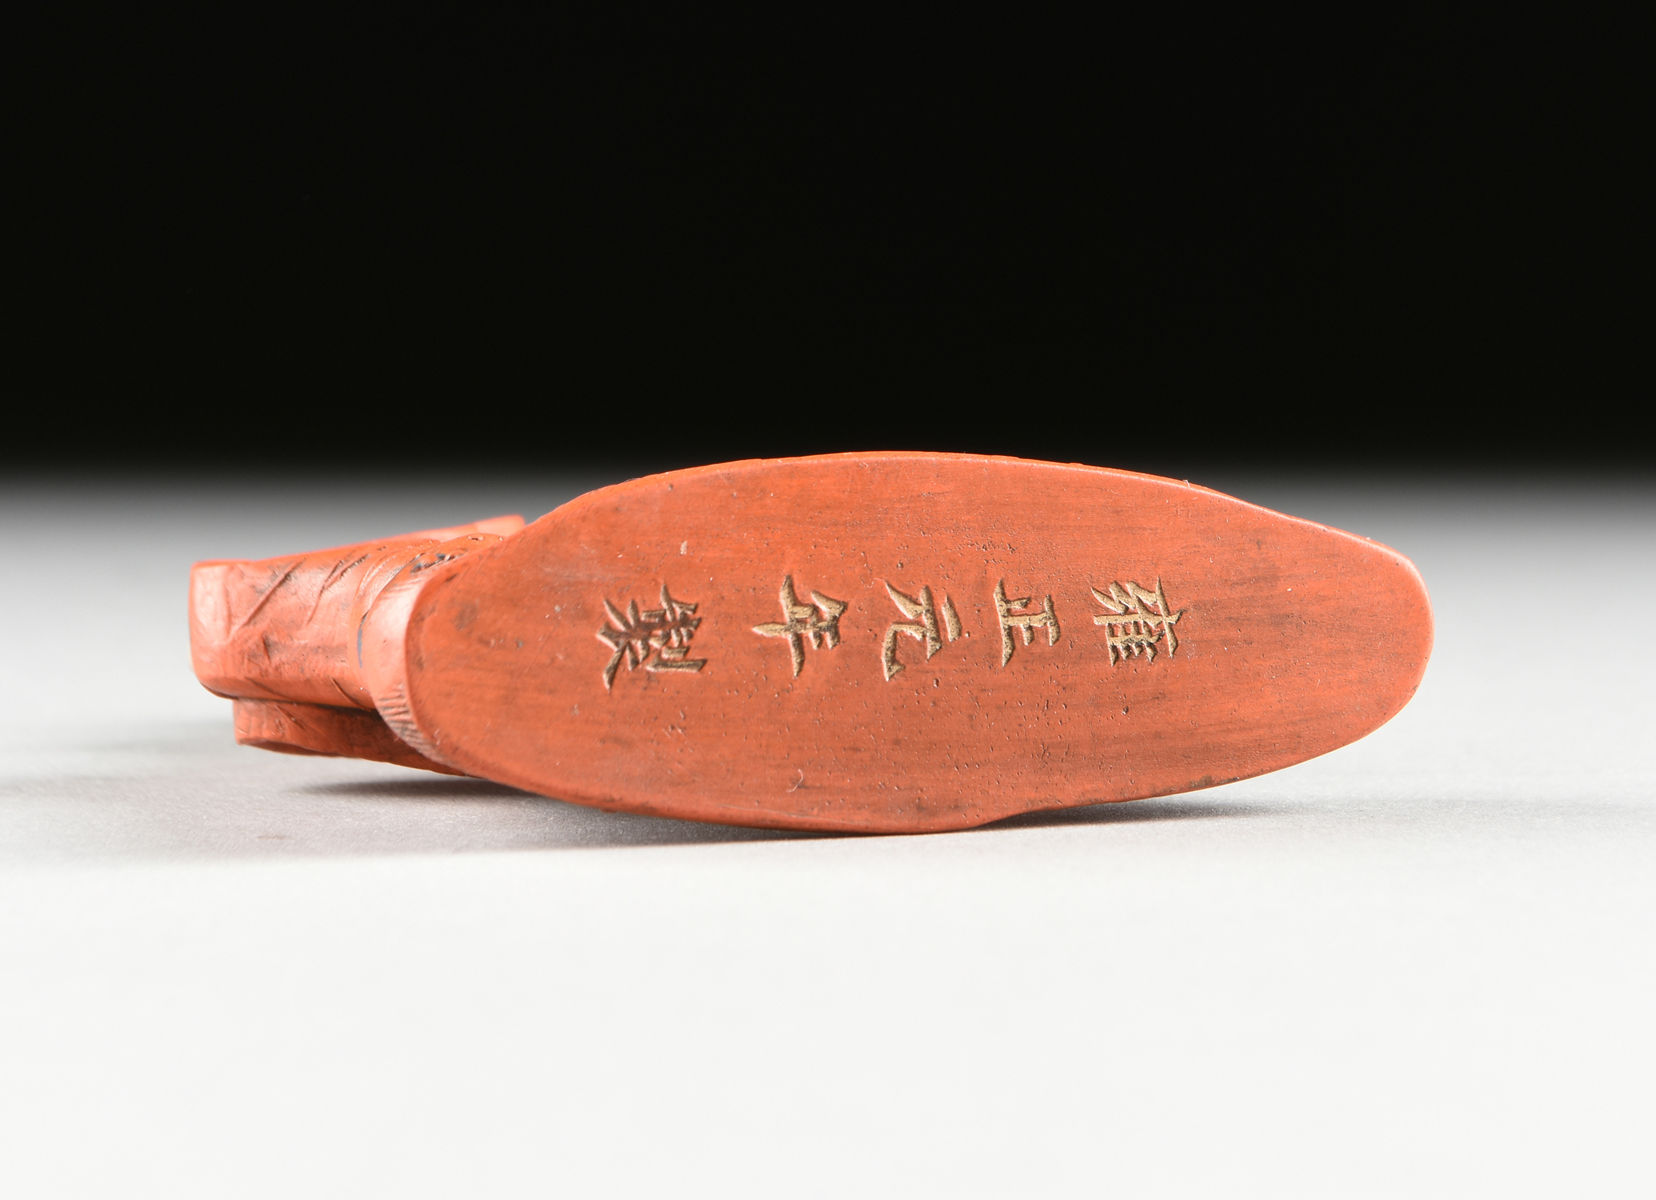 A FAR EAST ASIAN PARCEL GILT ORANGE LACQUER SEAL, LATE 19TH/EARLY 20TH CENTURY, a vegetal lotus leaf - Image 6 of 6